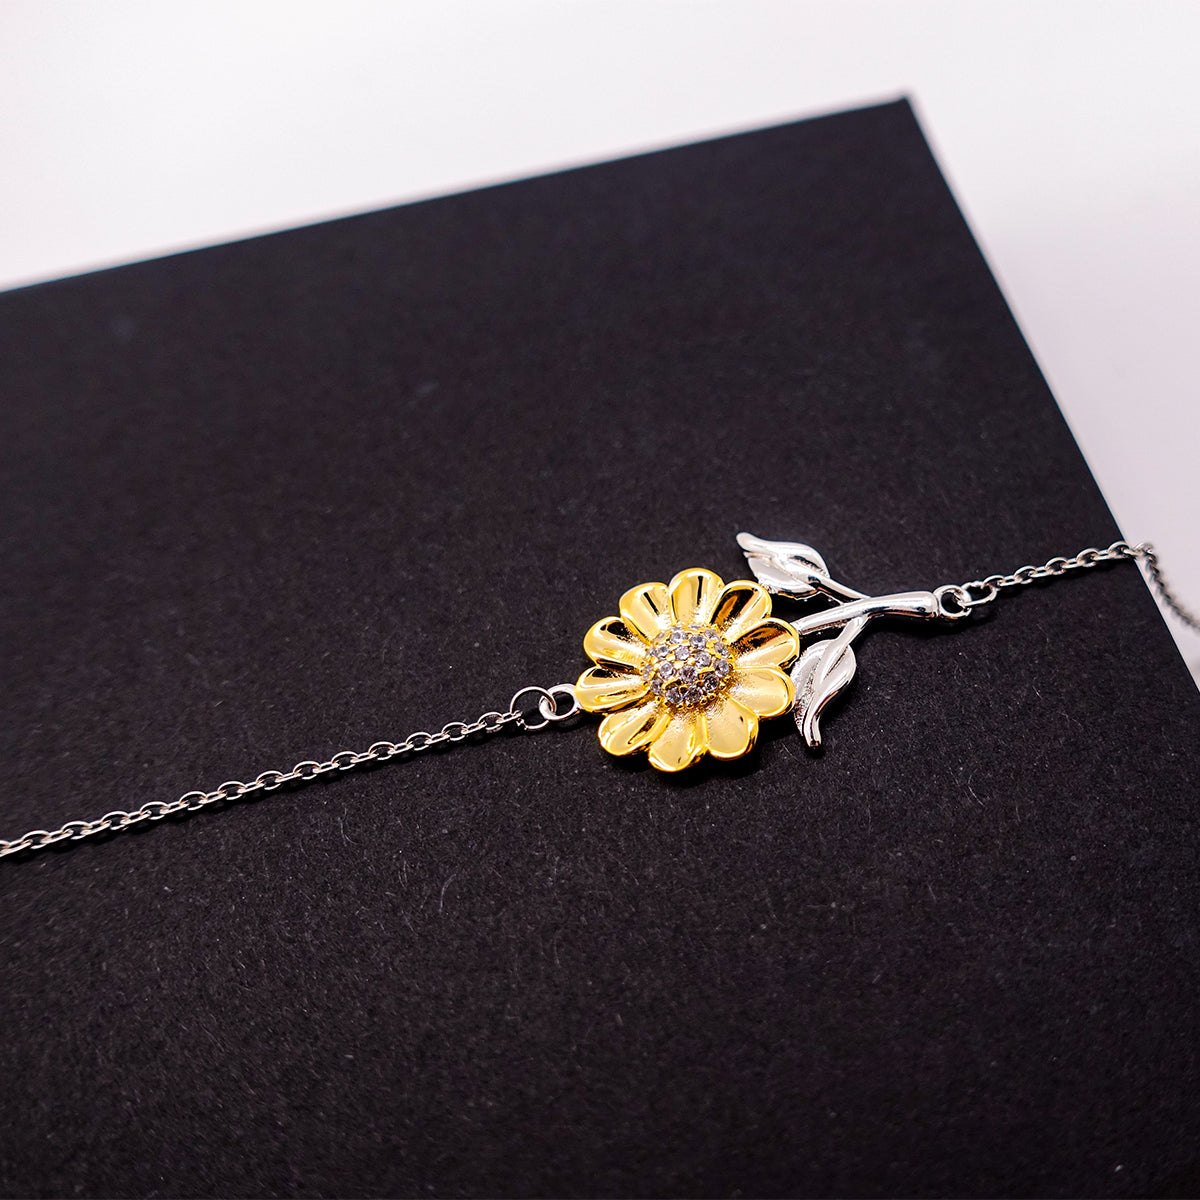 Heartwarming Sunflower Bracelet Retirement Coworkers Gifts for Ambulance Driver, Ambulance Driver May You be proud of the work you do, the person you are Gifts for Boss Men Women Friends